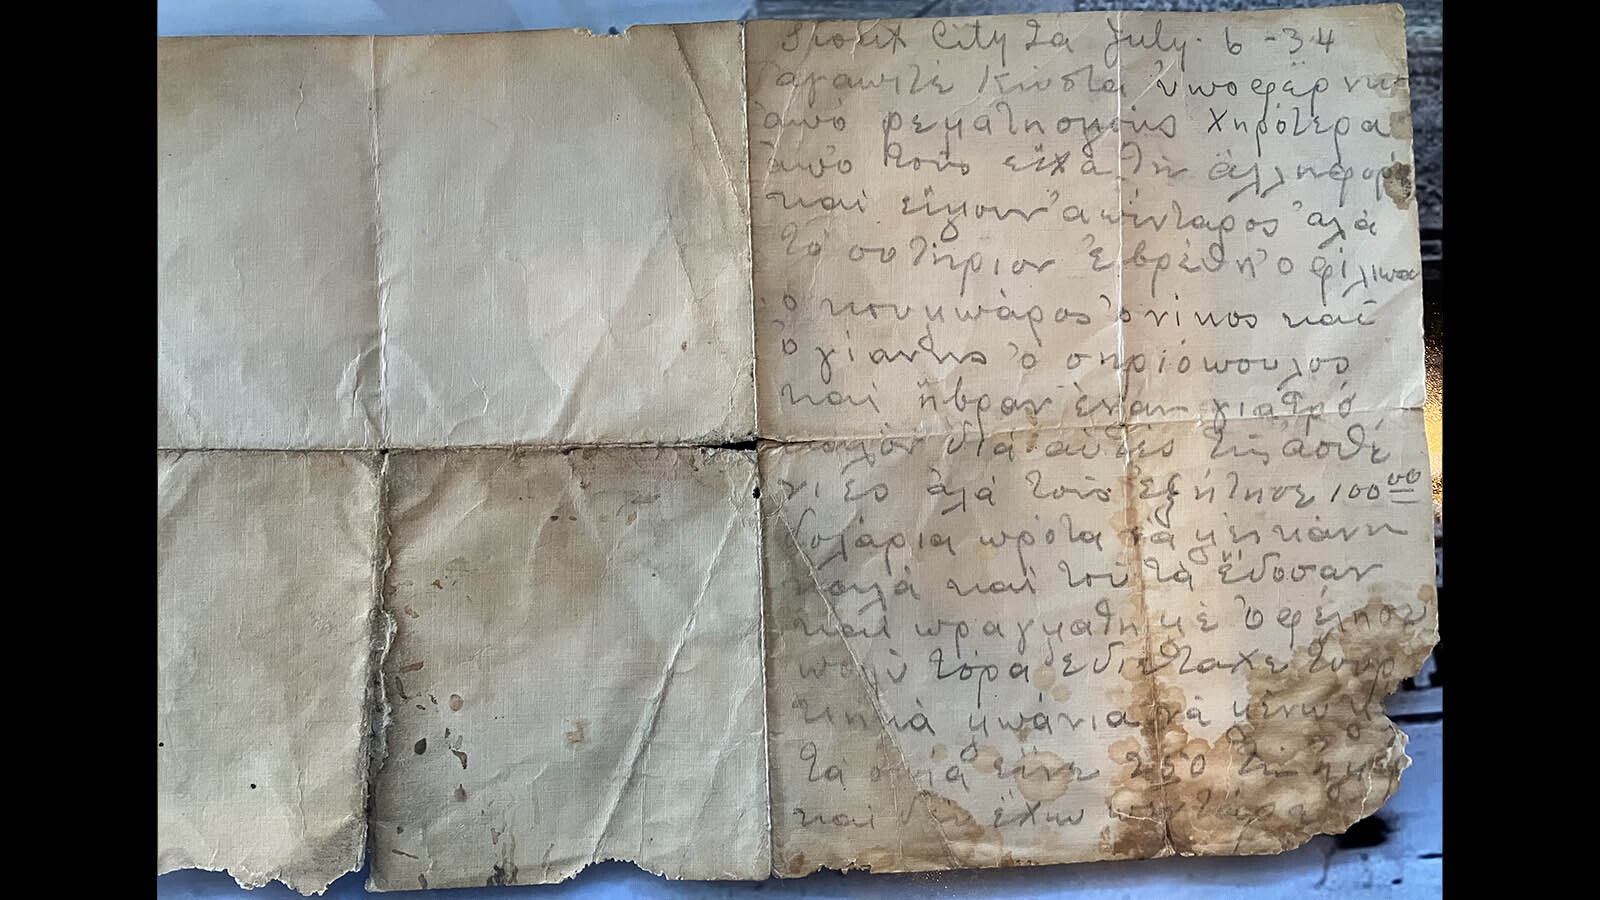 This 1934 letter, written in Greek, was found wedged beside a wall during renovations.